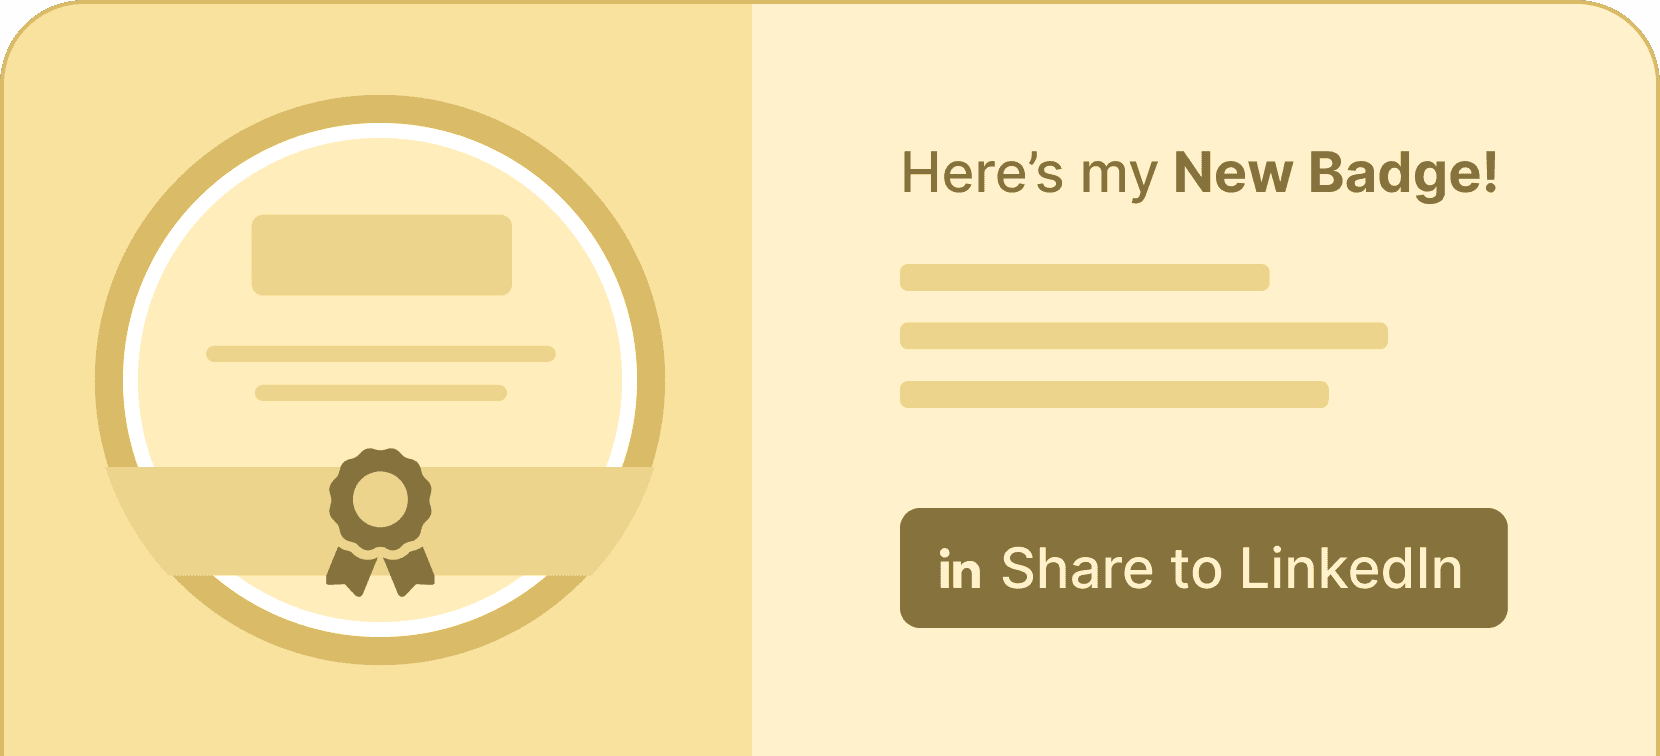 Share badge on linkedin - Certifier features